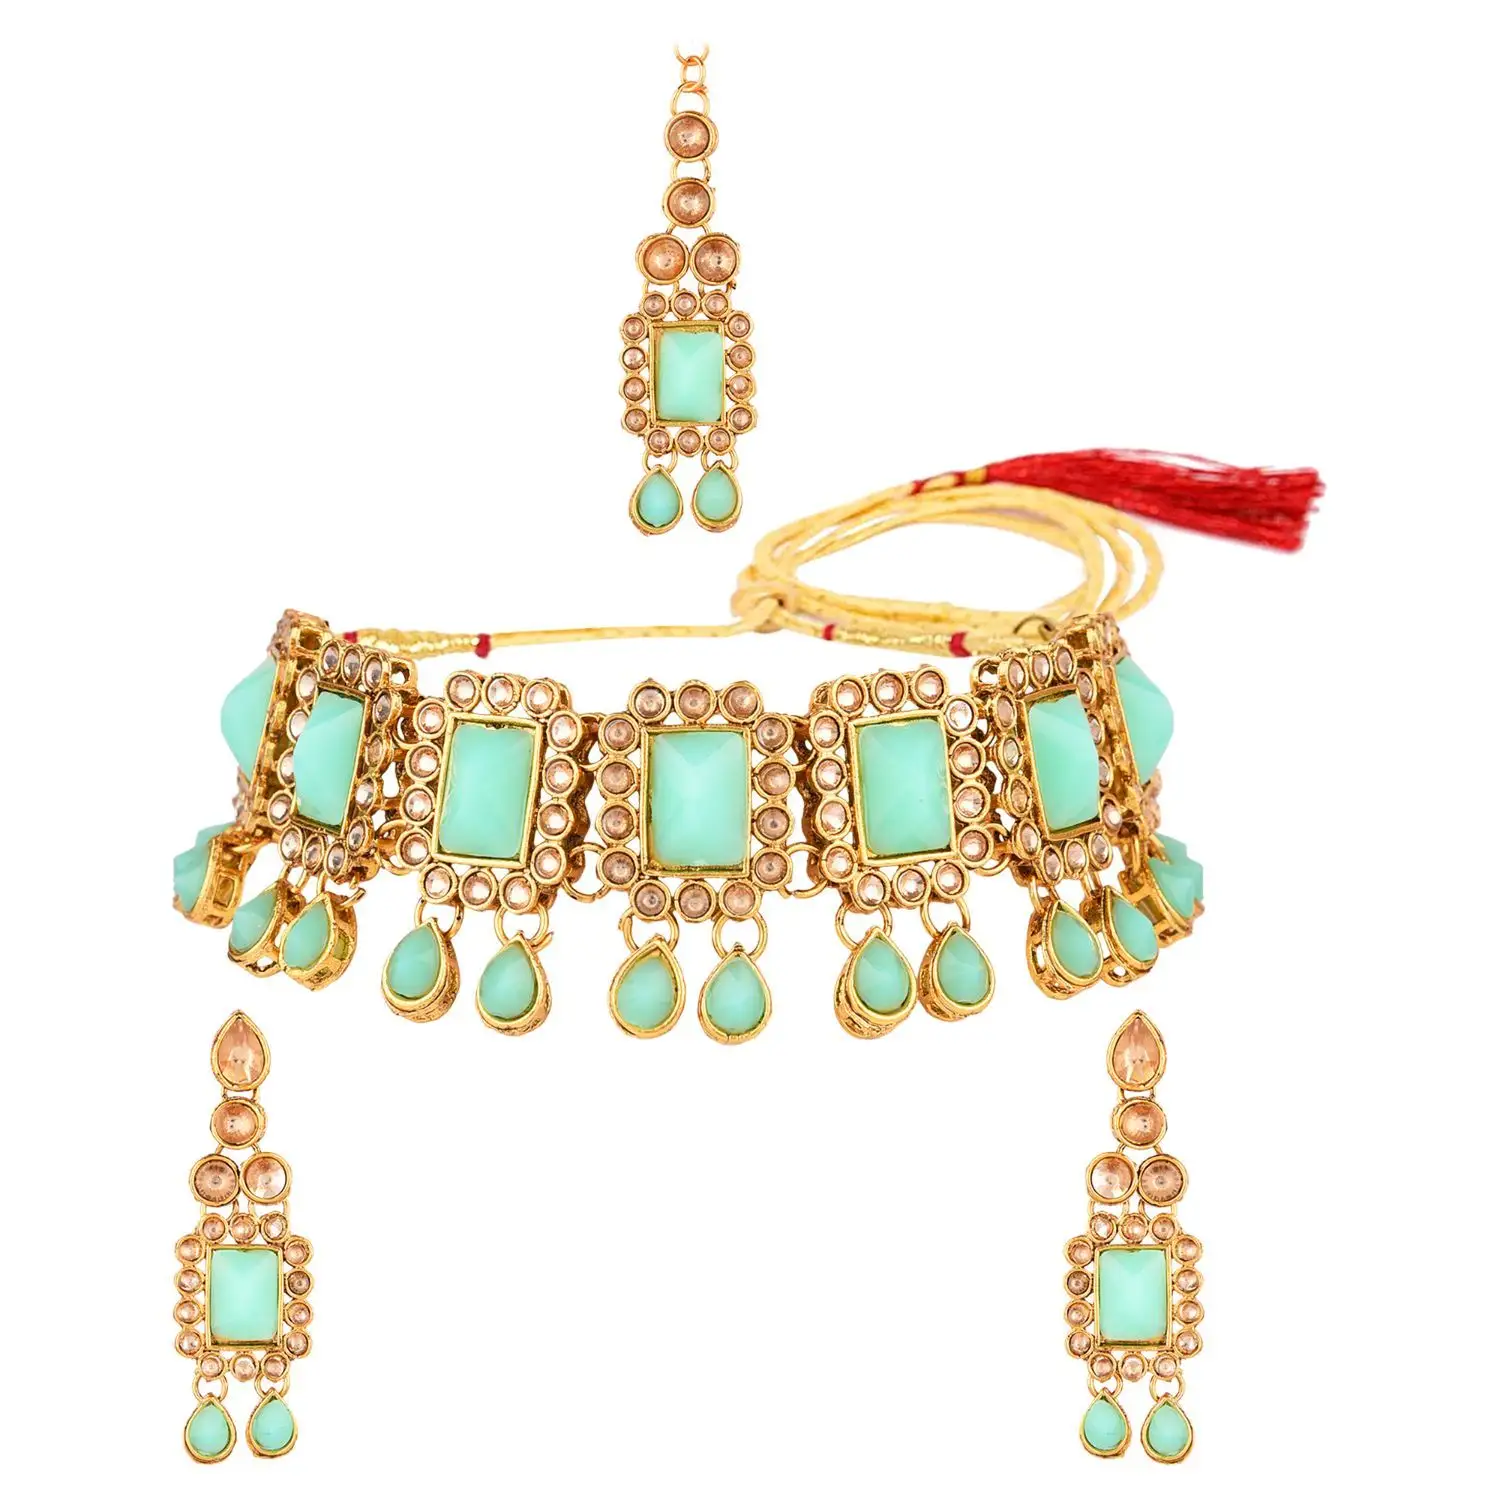 High Quality Indian Jewelry Manufacturer Kundan Crystal Choker Necklace Earrings Set Bollywood Fashion Jewelry for Women